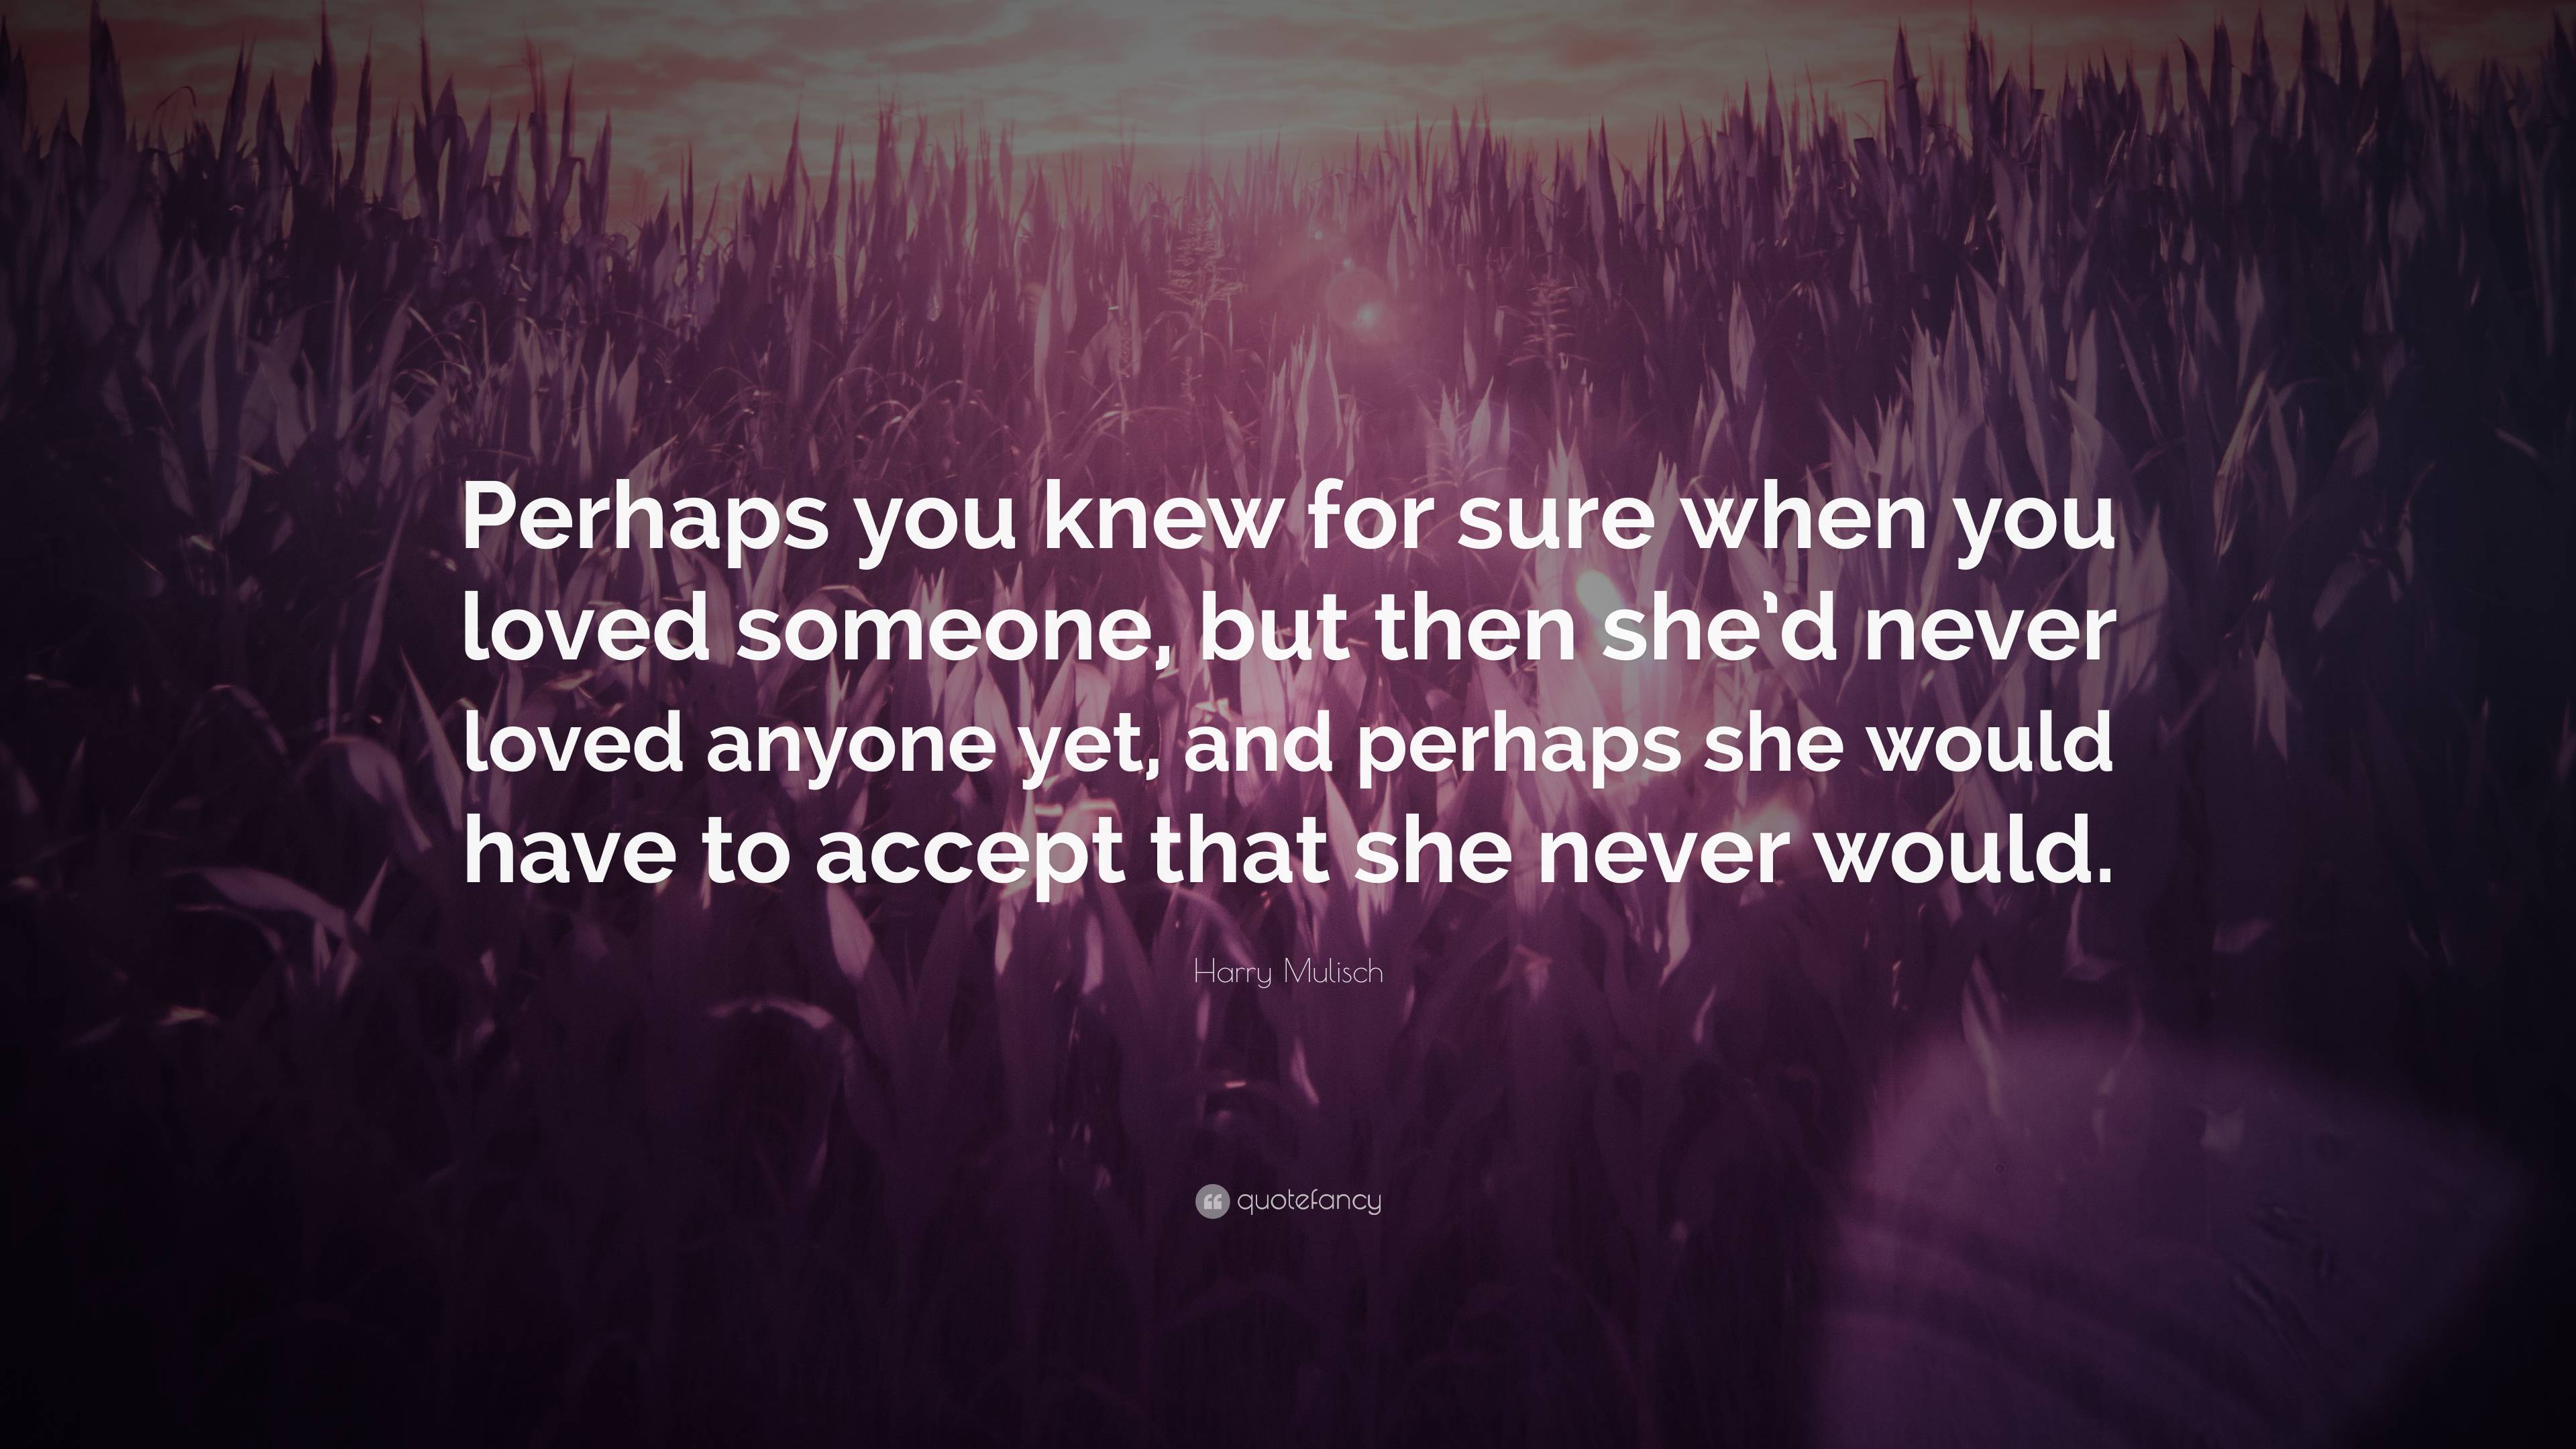 Harry Mulisch Quote: “Perhaps you knew for sure when you loved someone ...